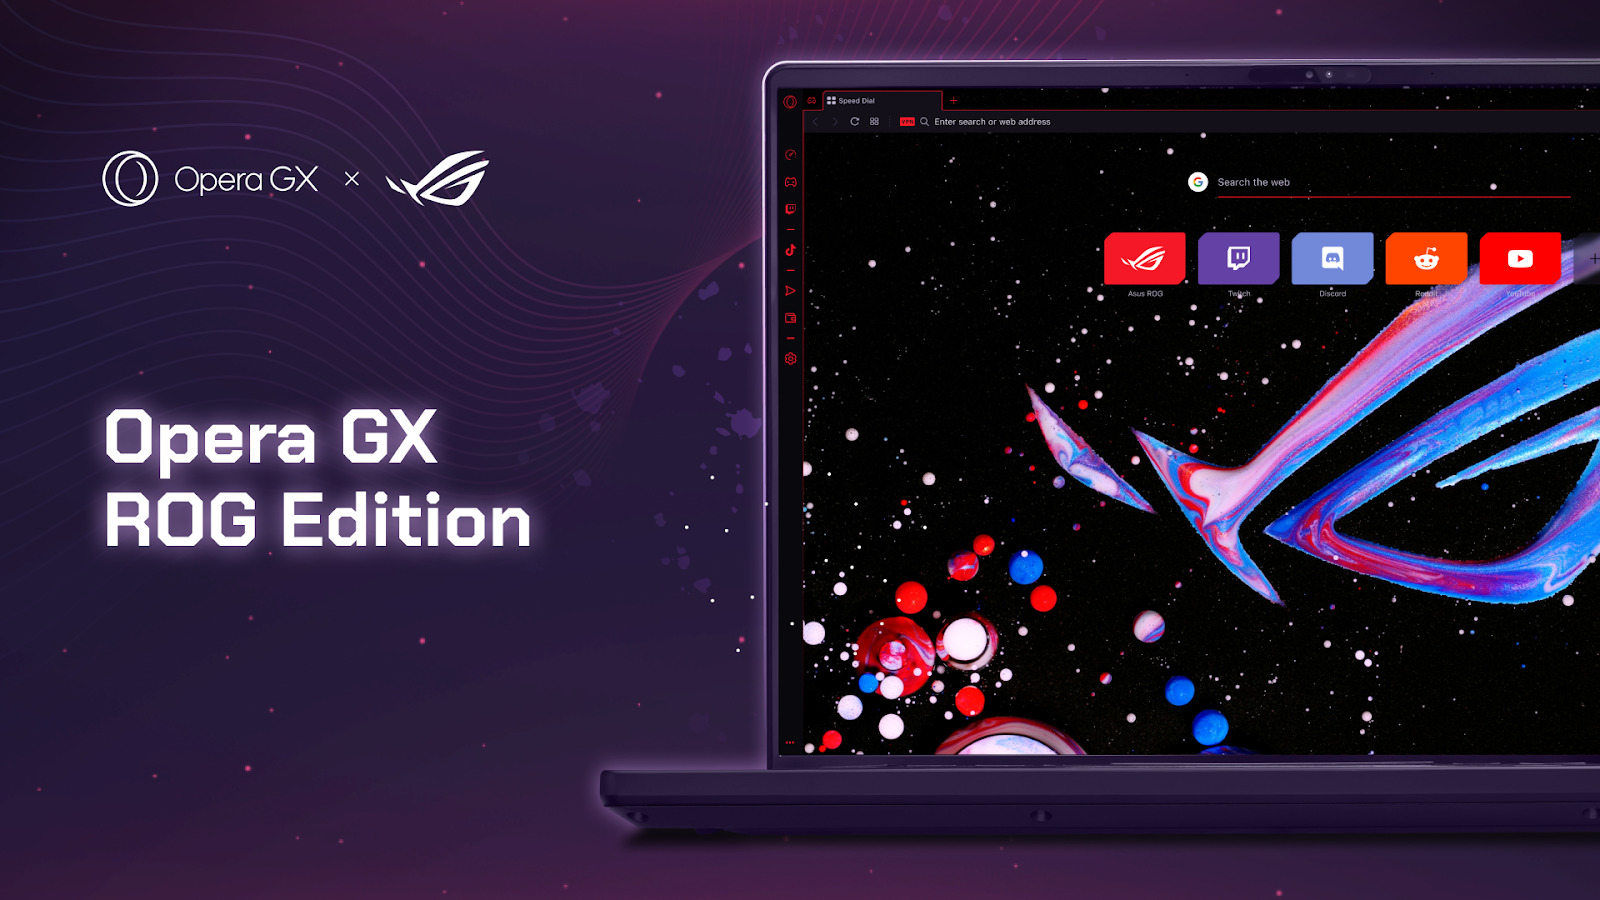 A laptop shows the Opera GX ROG Edition, developed in collaboration with ASUS.